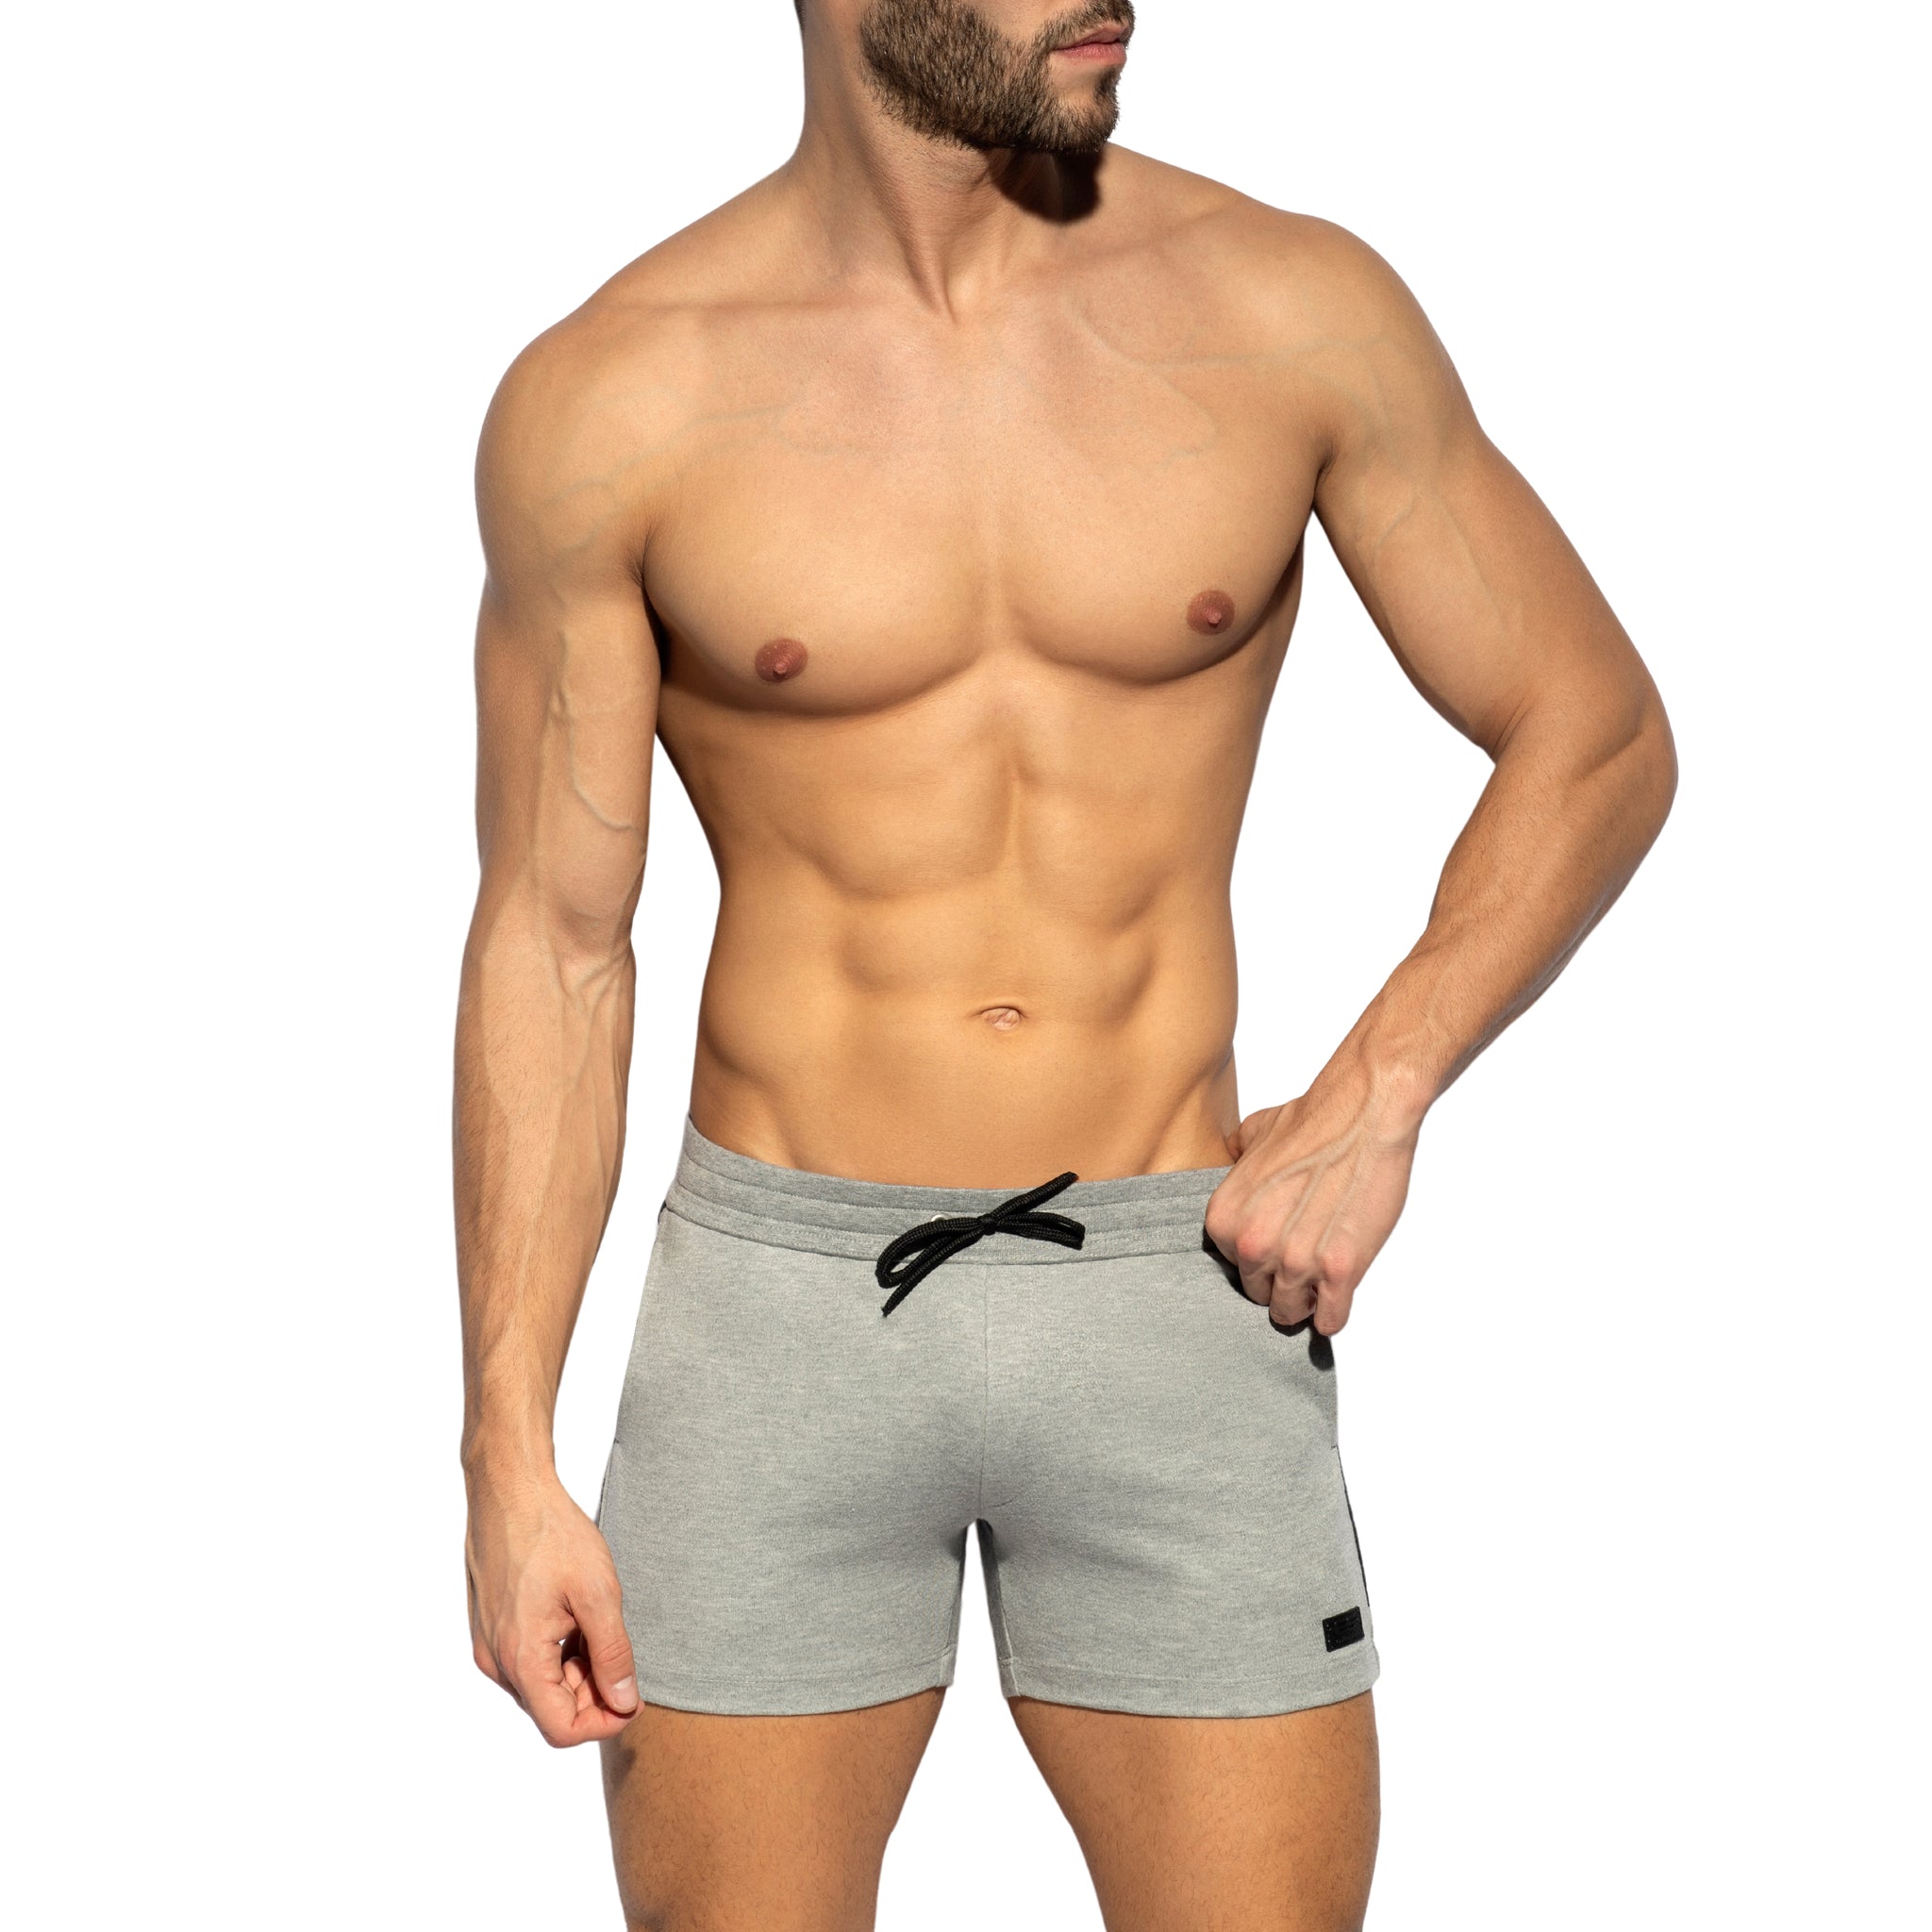 ES Collection First Class Athletic Shorts Heather Grey SP298